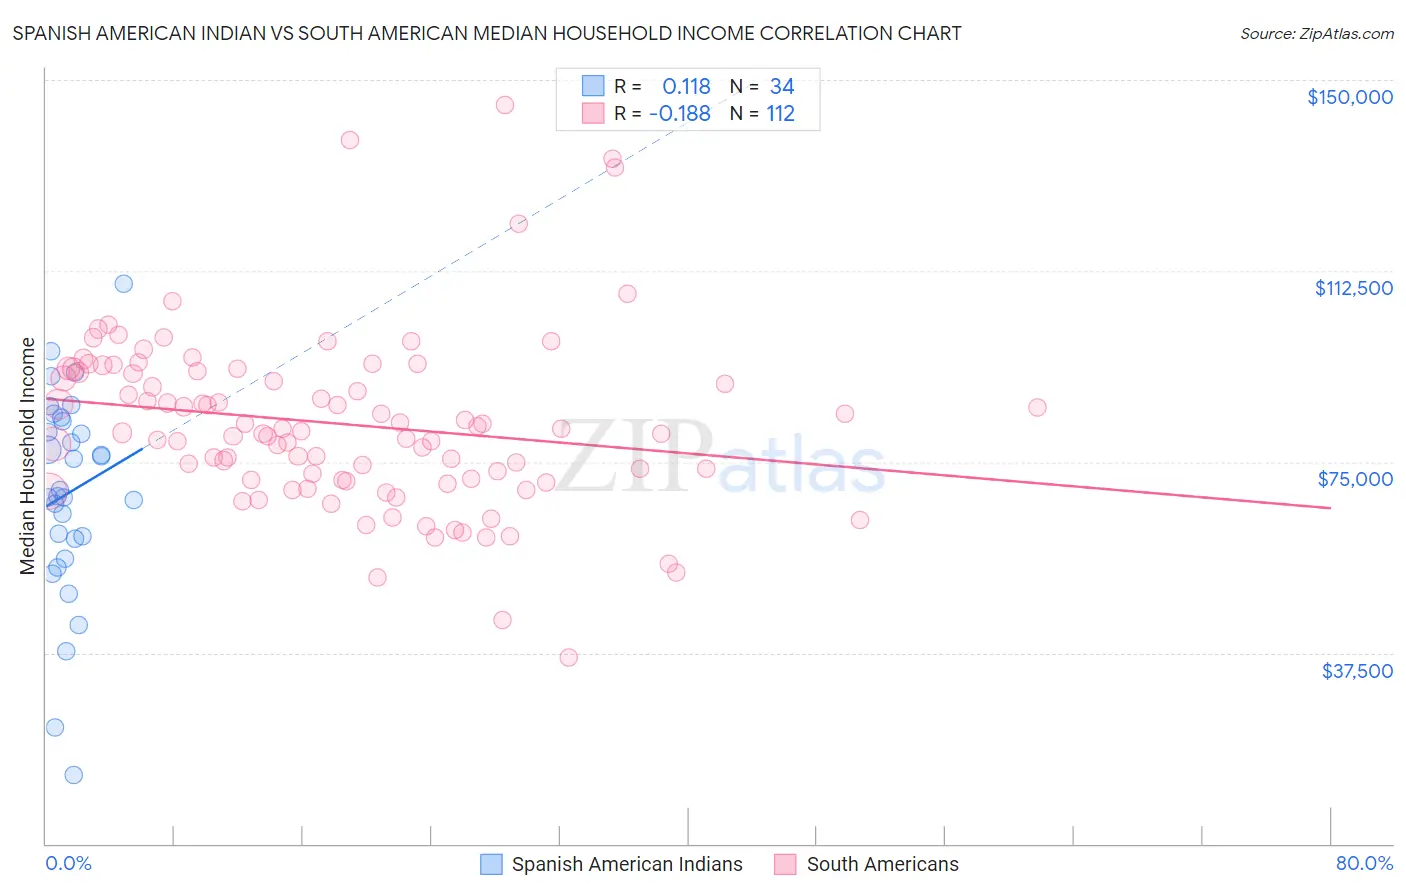 Spanish American Indian vs South American Median Household Income